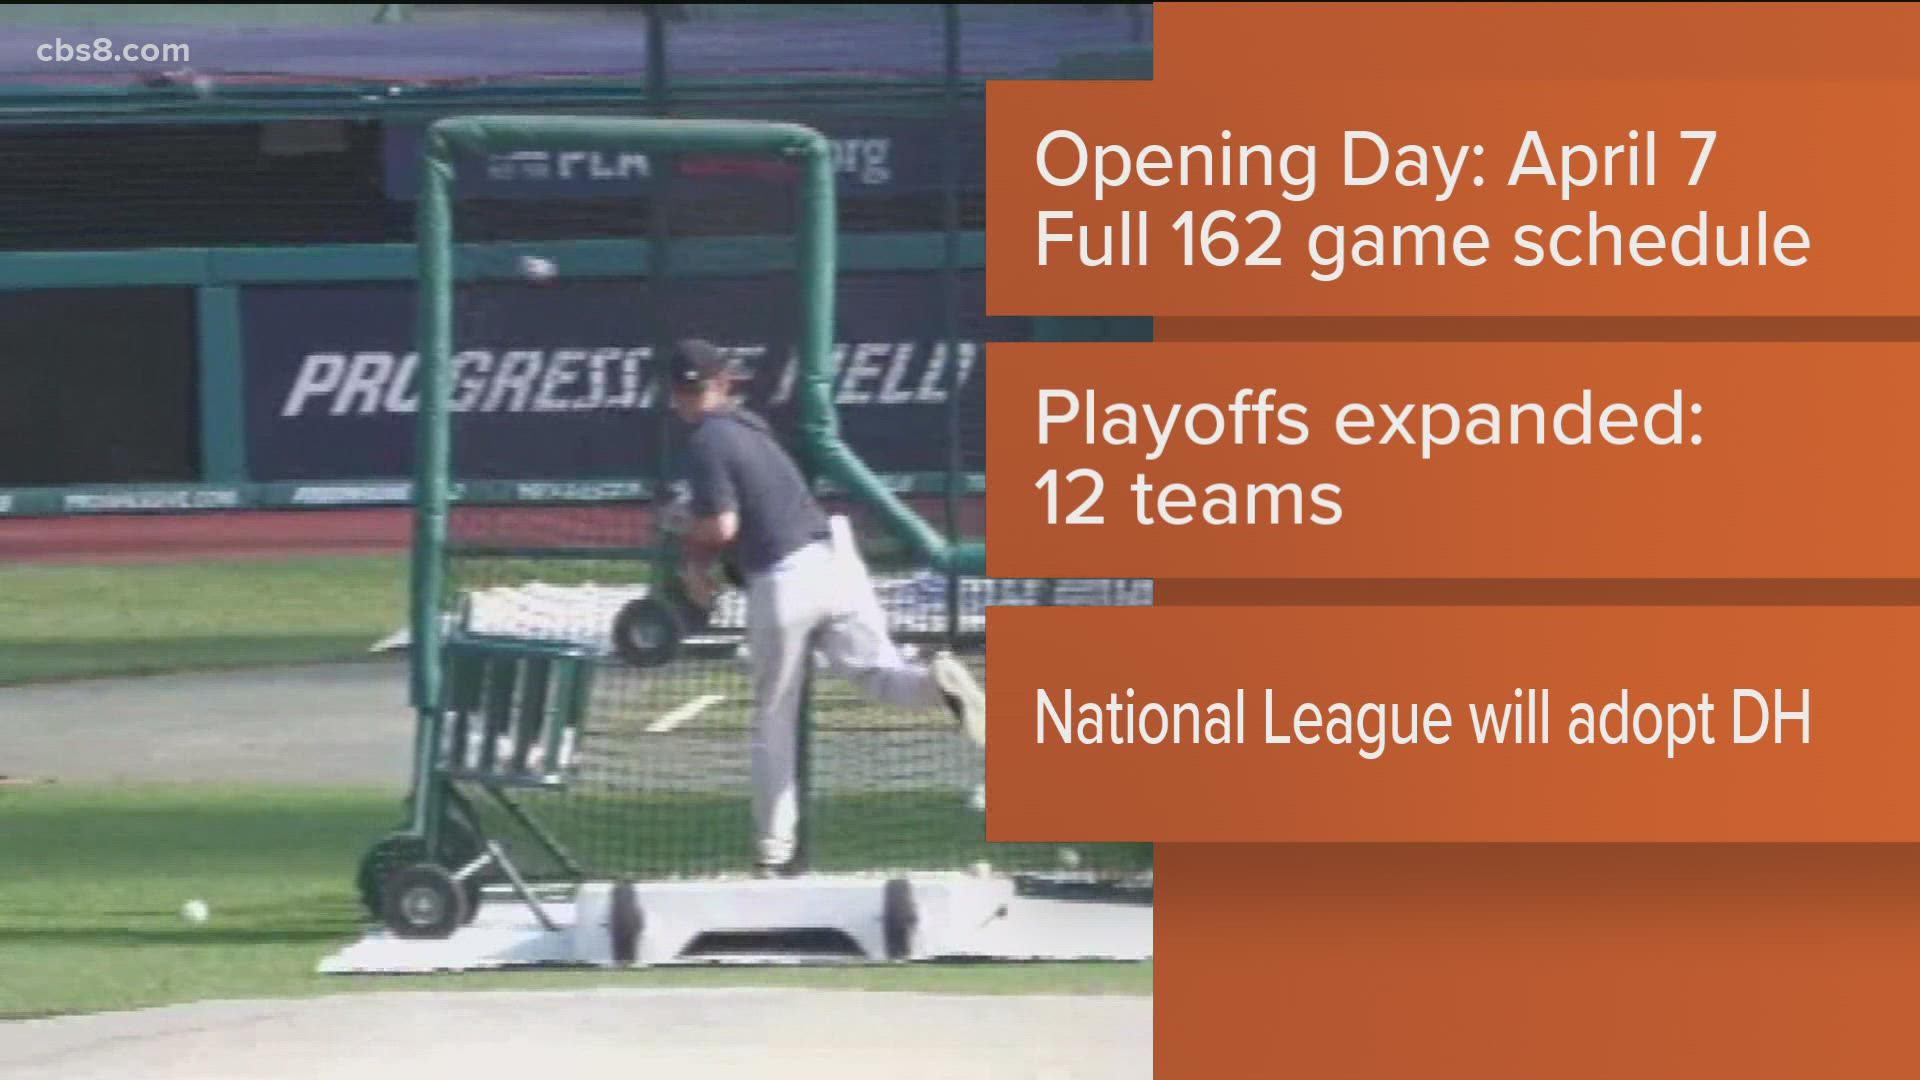 The Major League Baseball season will start April 7 and keep all 162 games. Exhibition games will begin March 17 or 18.